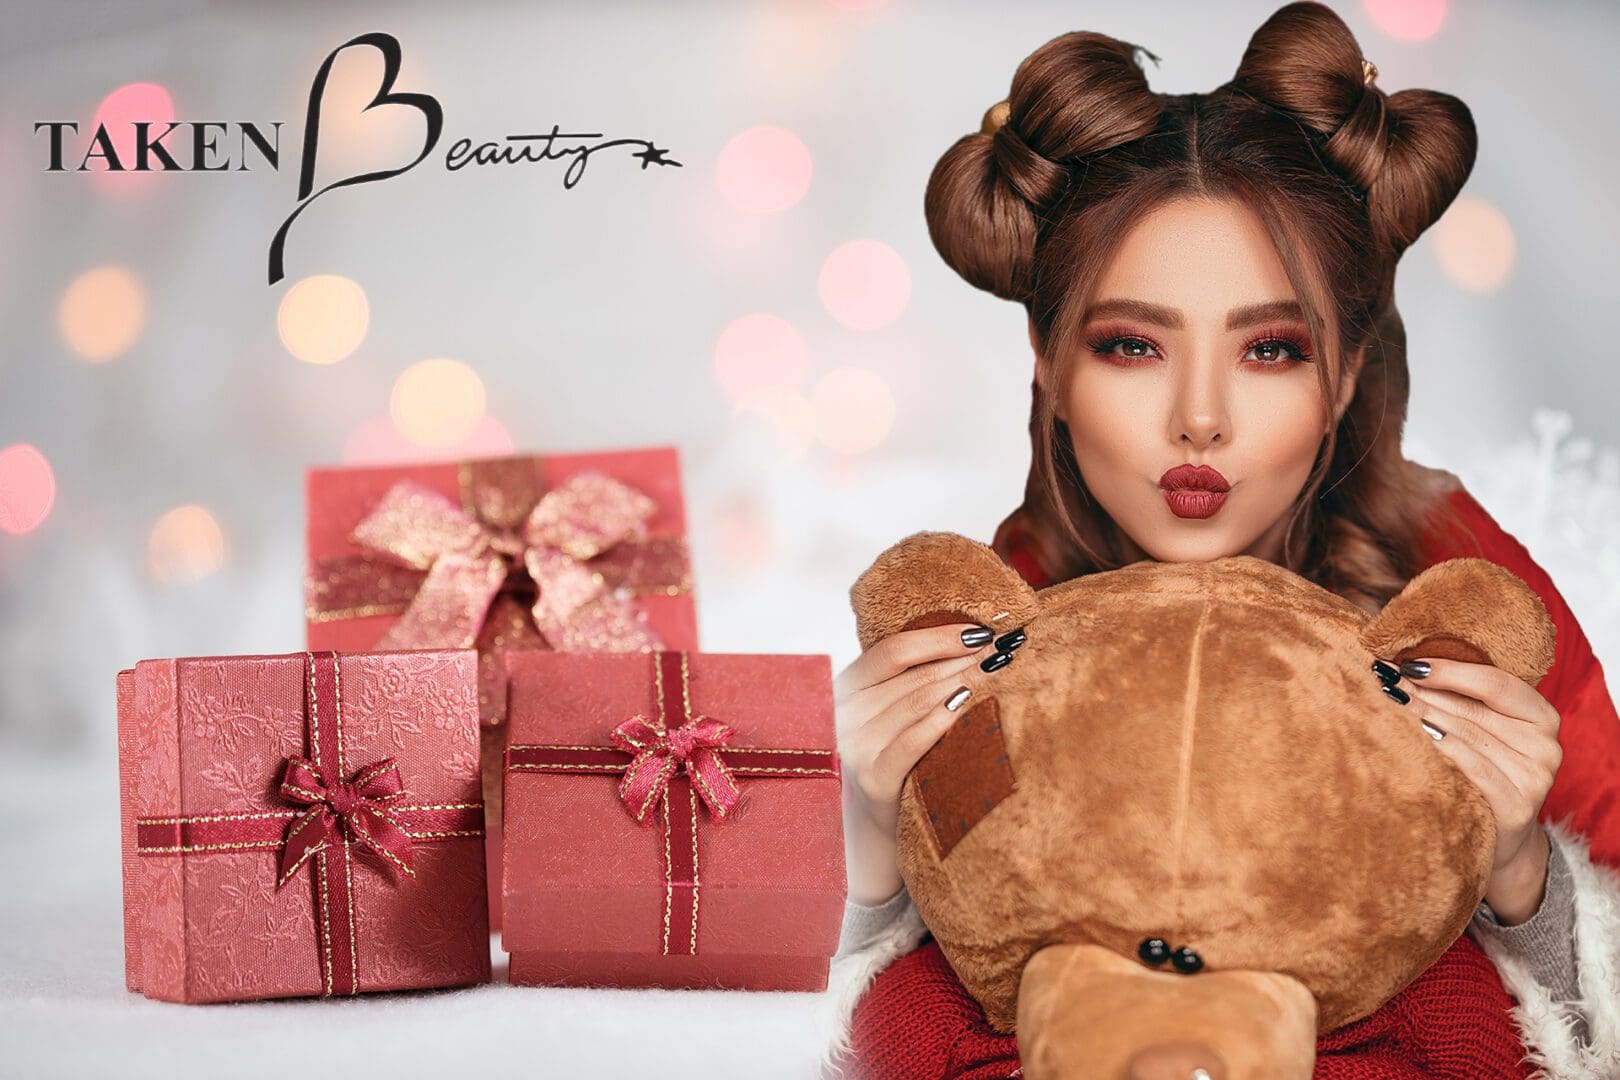 A woman holding a teddy bear and some presents